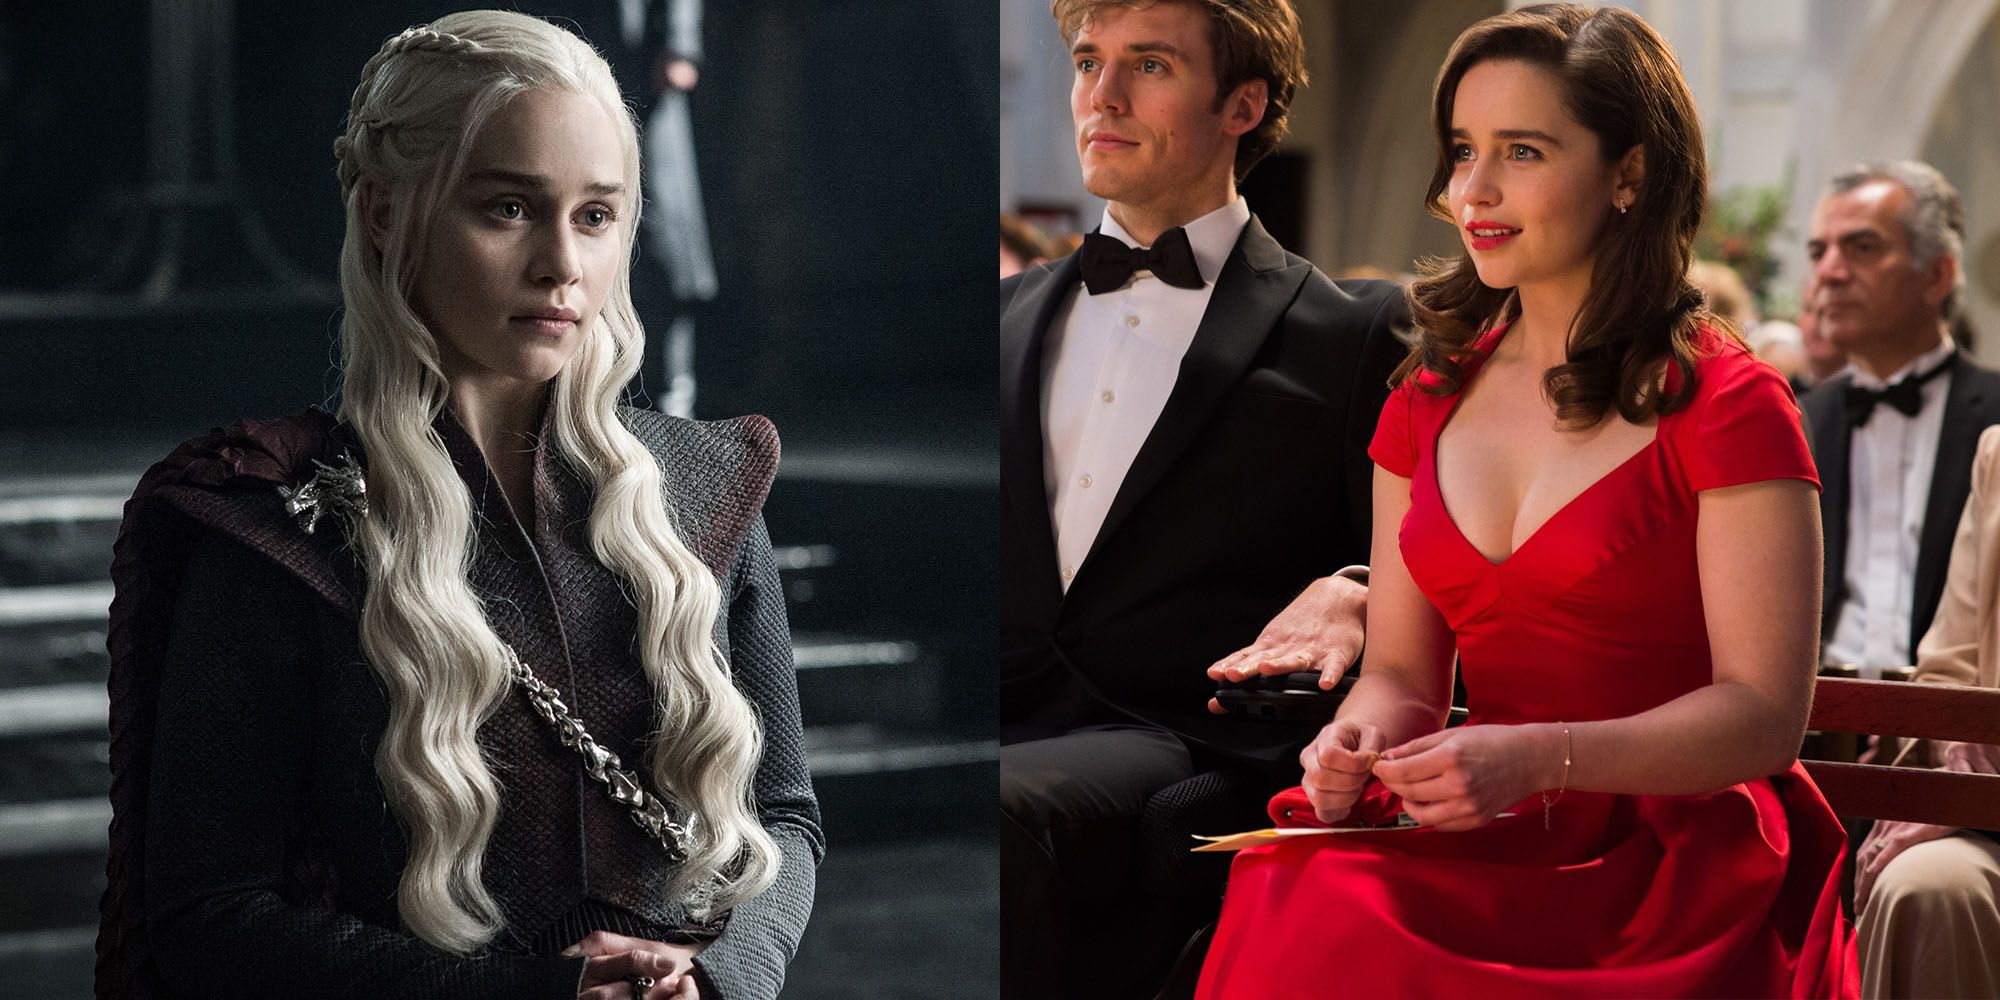 Game of Thrones' Actors Next Movies and TV Shows: Where Are They Now?